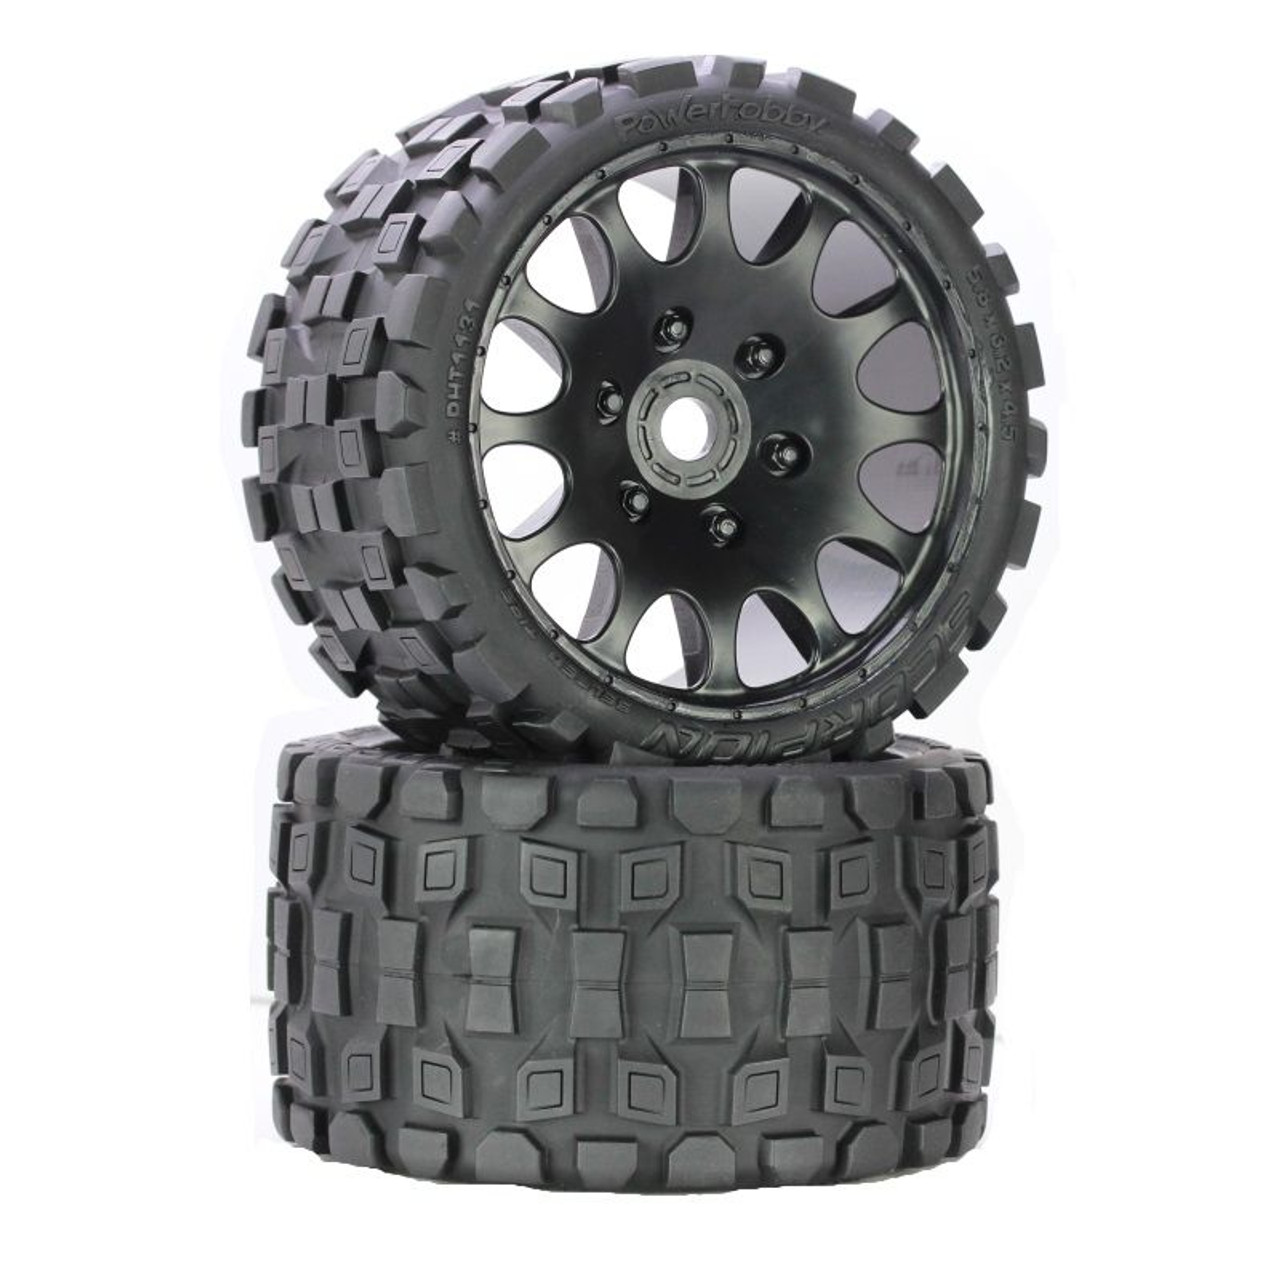 Power Hobby 1131R Scorpion Belted Monster Truck Wheels/Tires (pr.), Pre-mounted, Race Soft Compound 17mm Hex